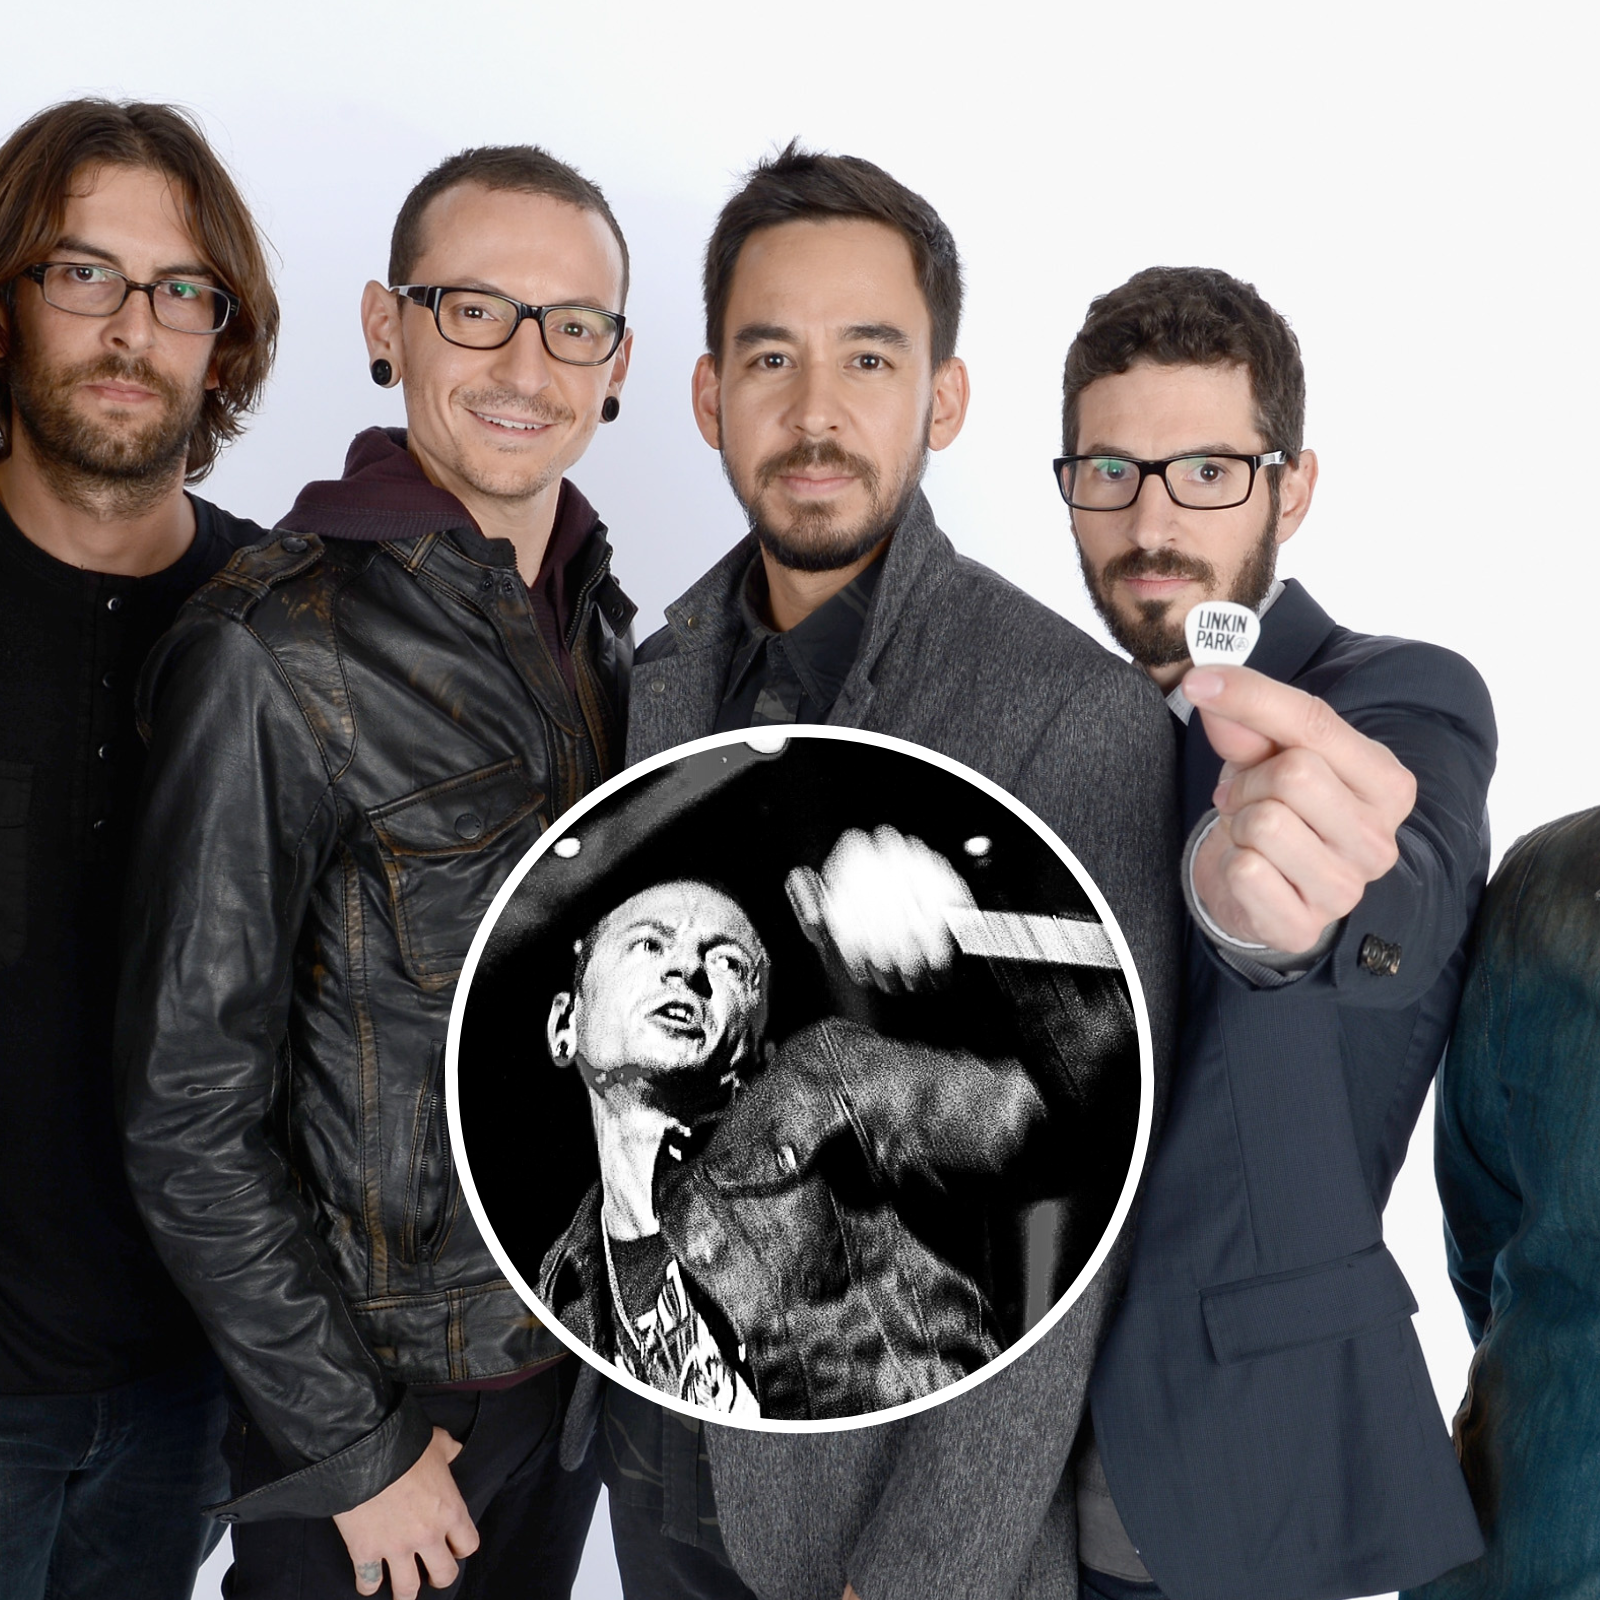 Linkin Park Release New Song 'Lost': What To Know About 'Meteora' Track